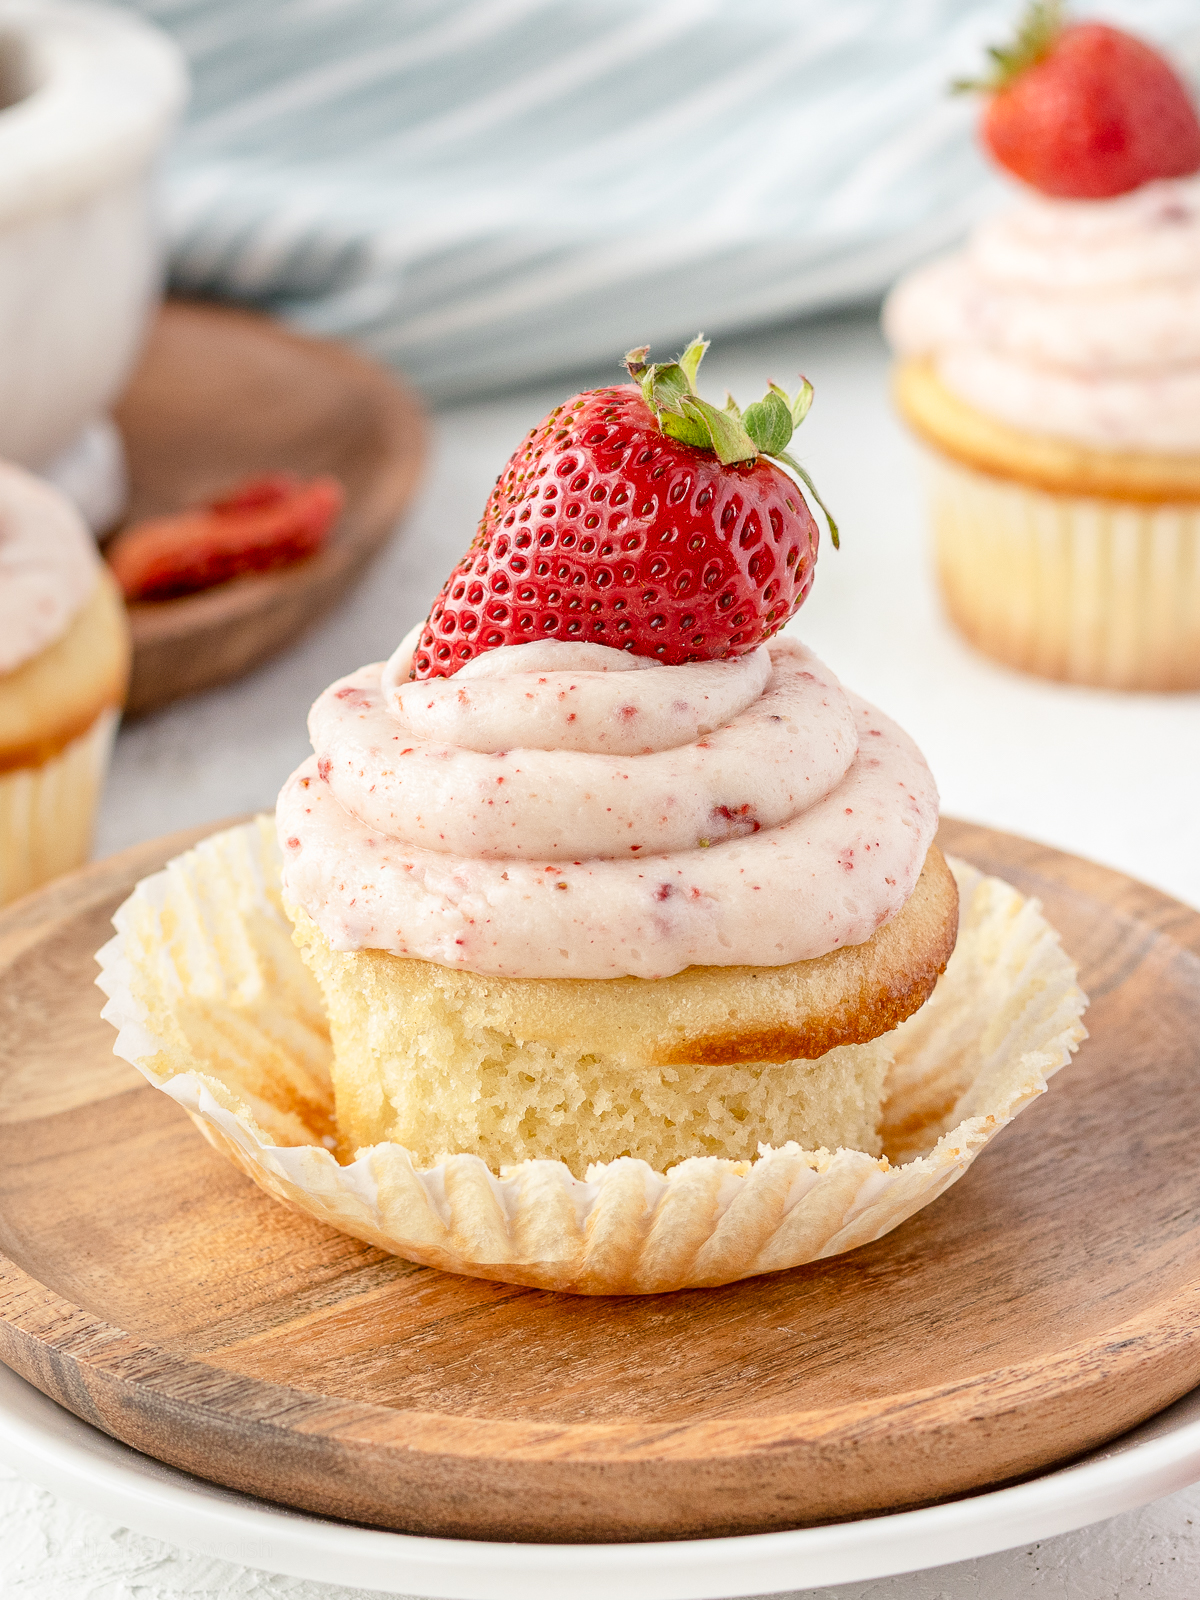 Unwrapped Strawberry Filled Cupcake ready to be ate.